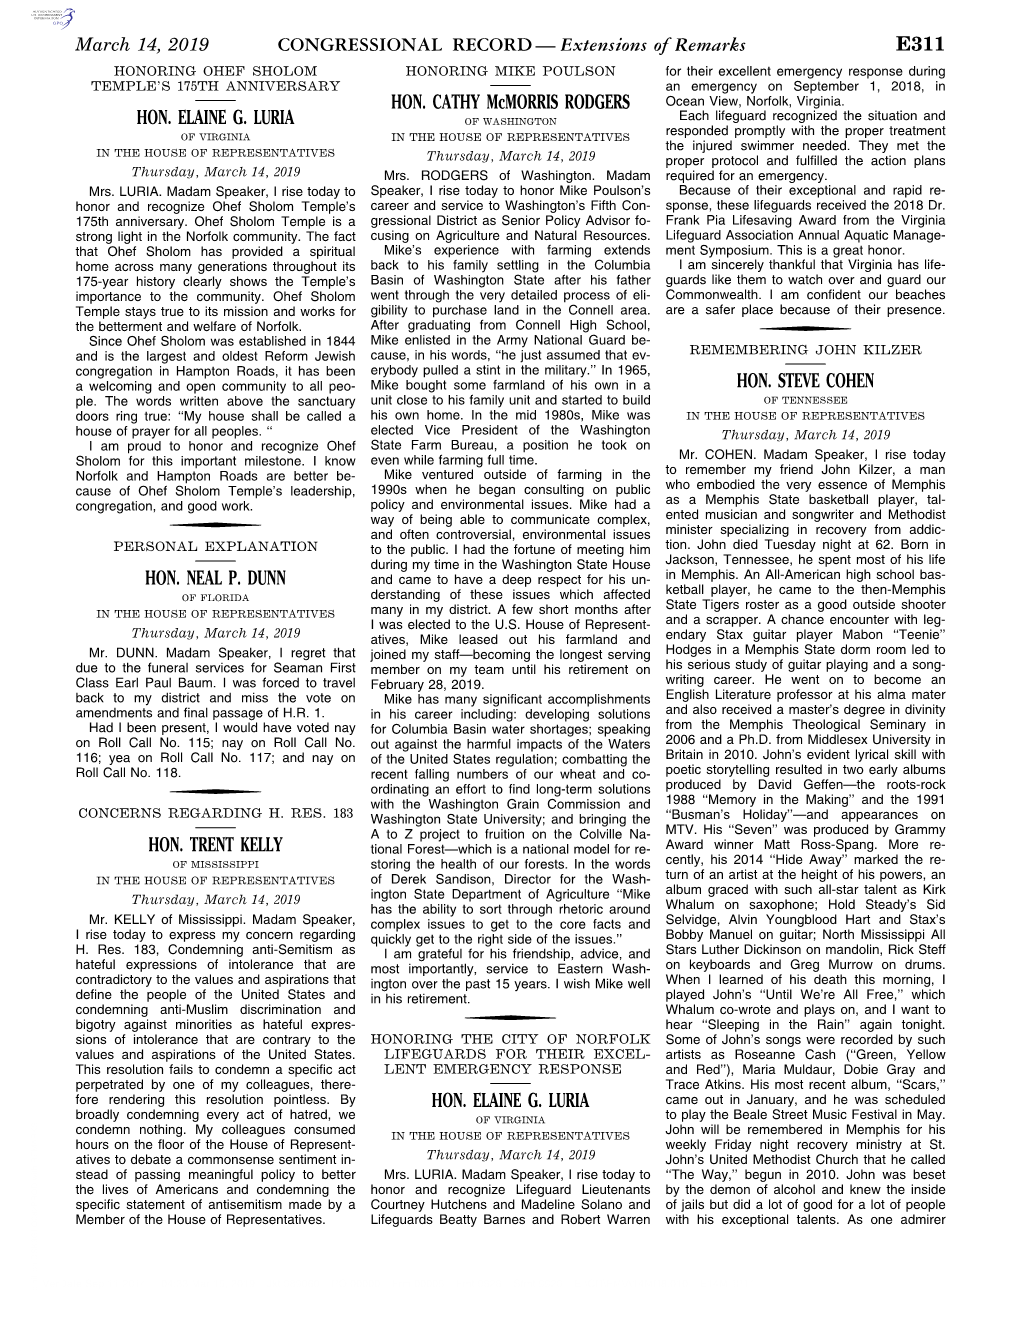 CONGRESSIONAL RECORD— Extensions of Remarks E311 HON